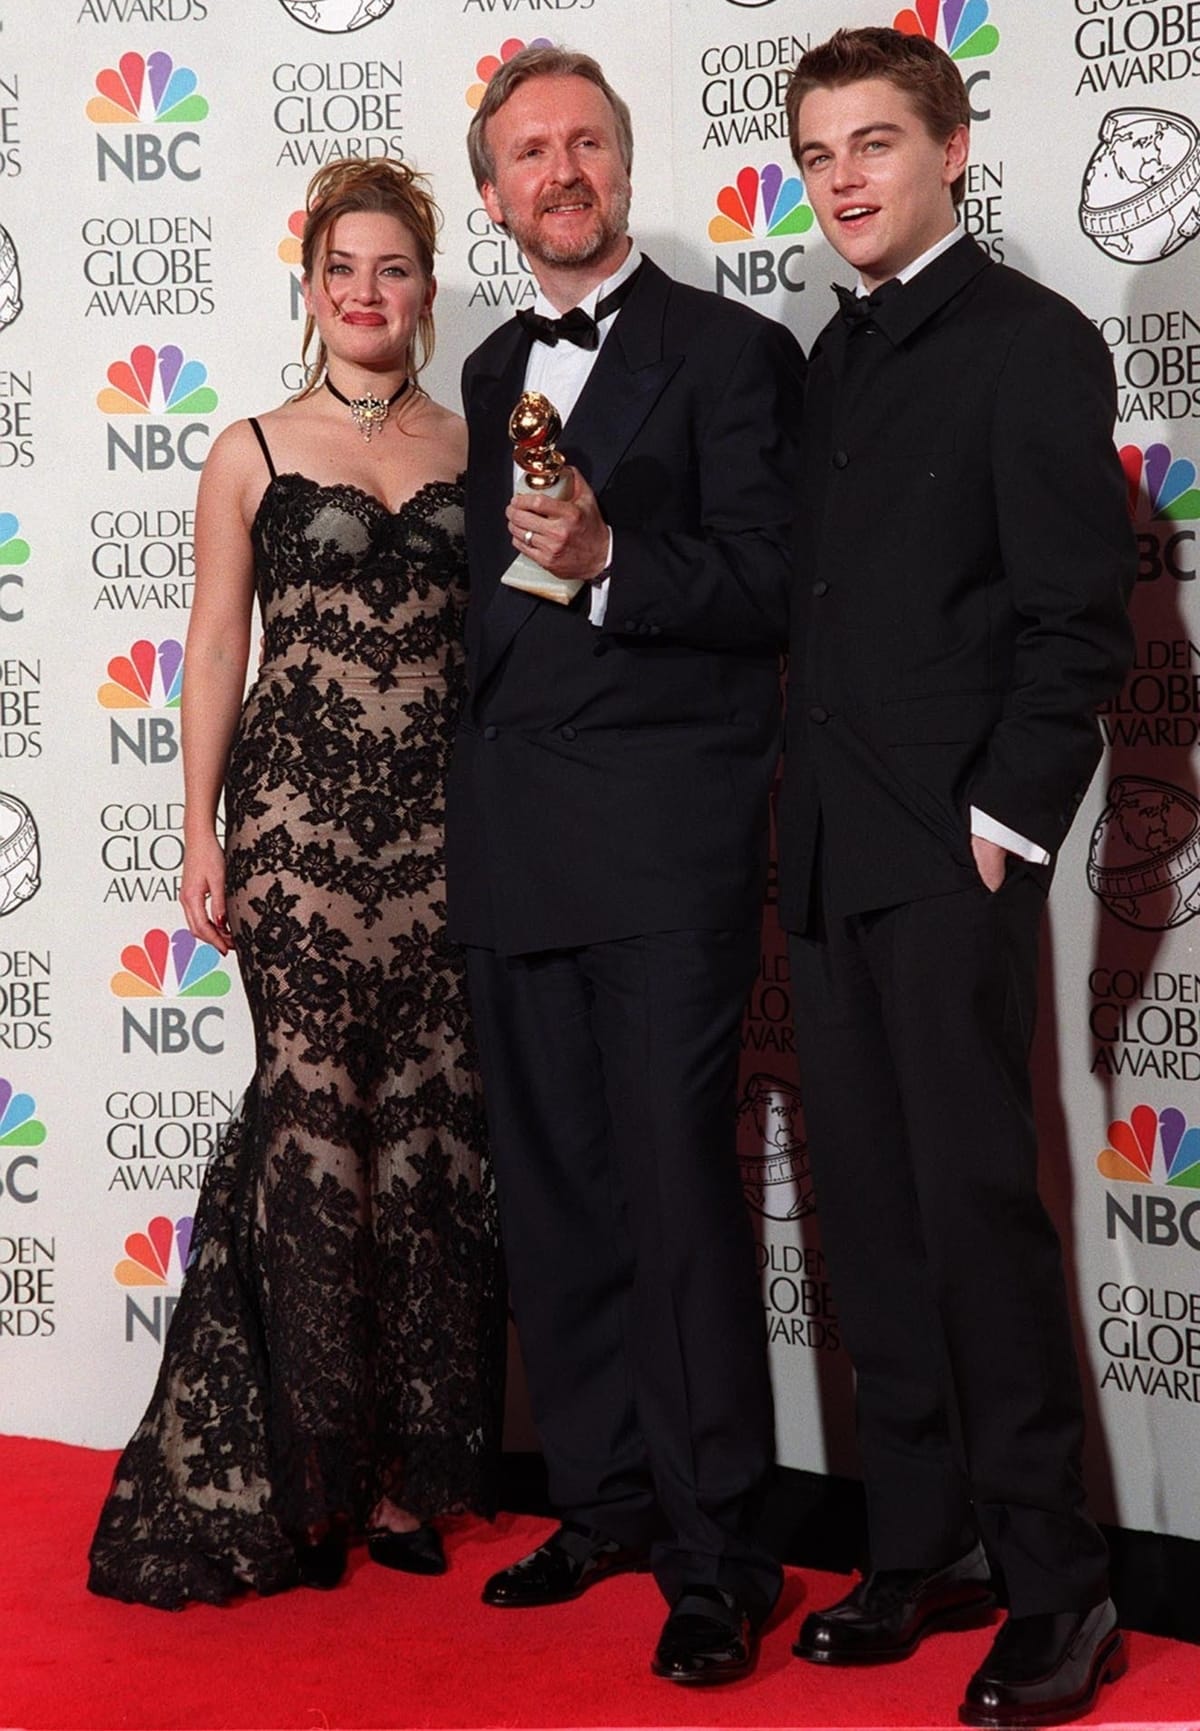 Kate Winslet, James Cameron, and Leonardo DiCaprio at the 55th Golden Globe Awards